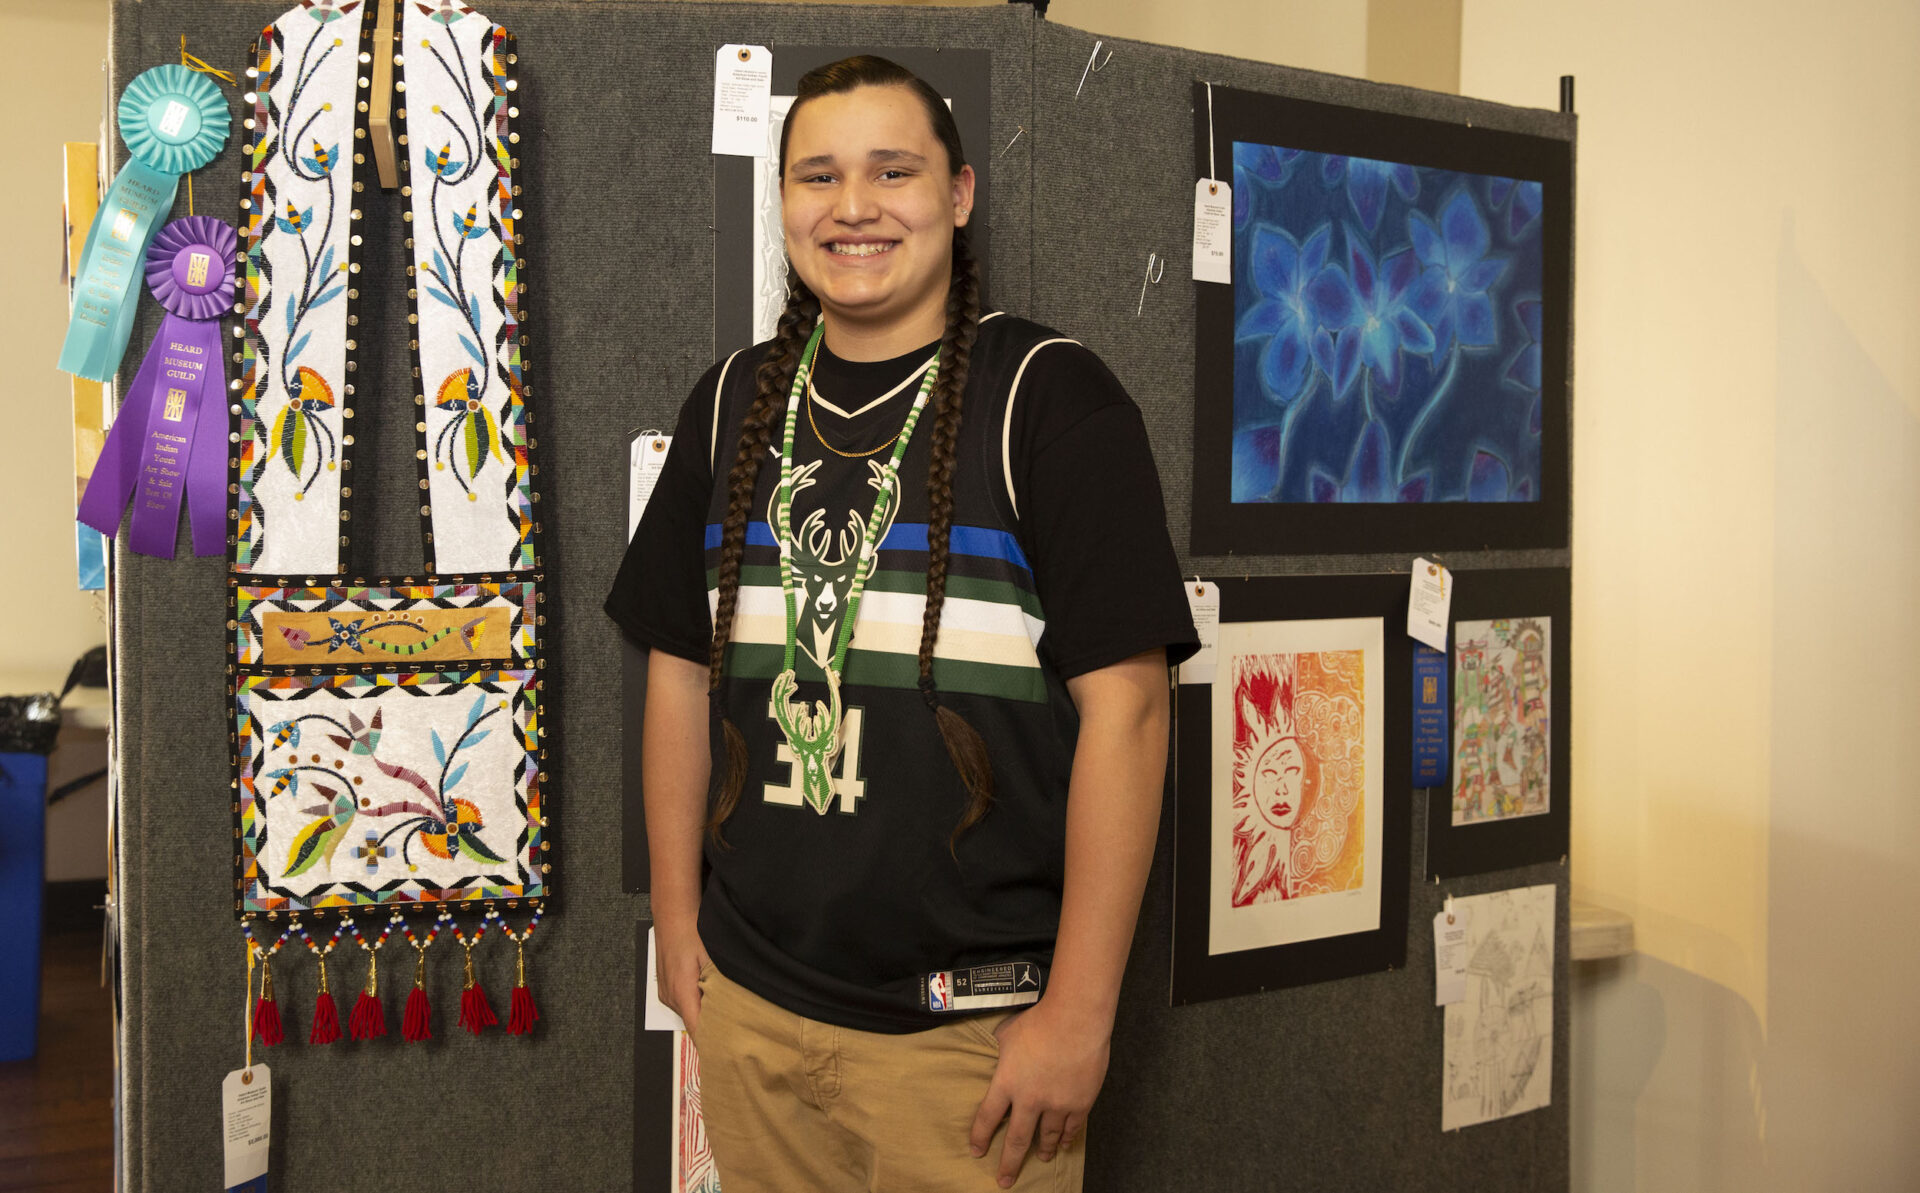 A young man standing in front of a display of art.